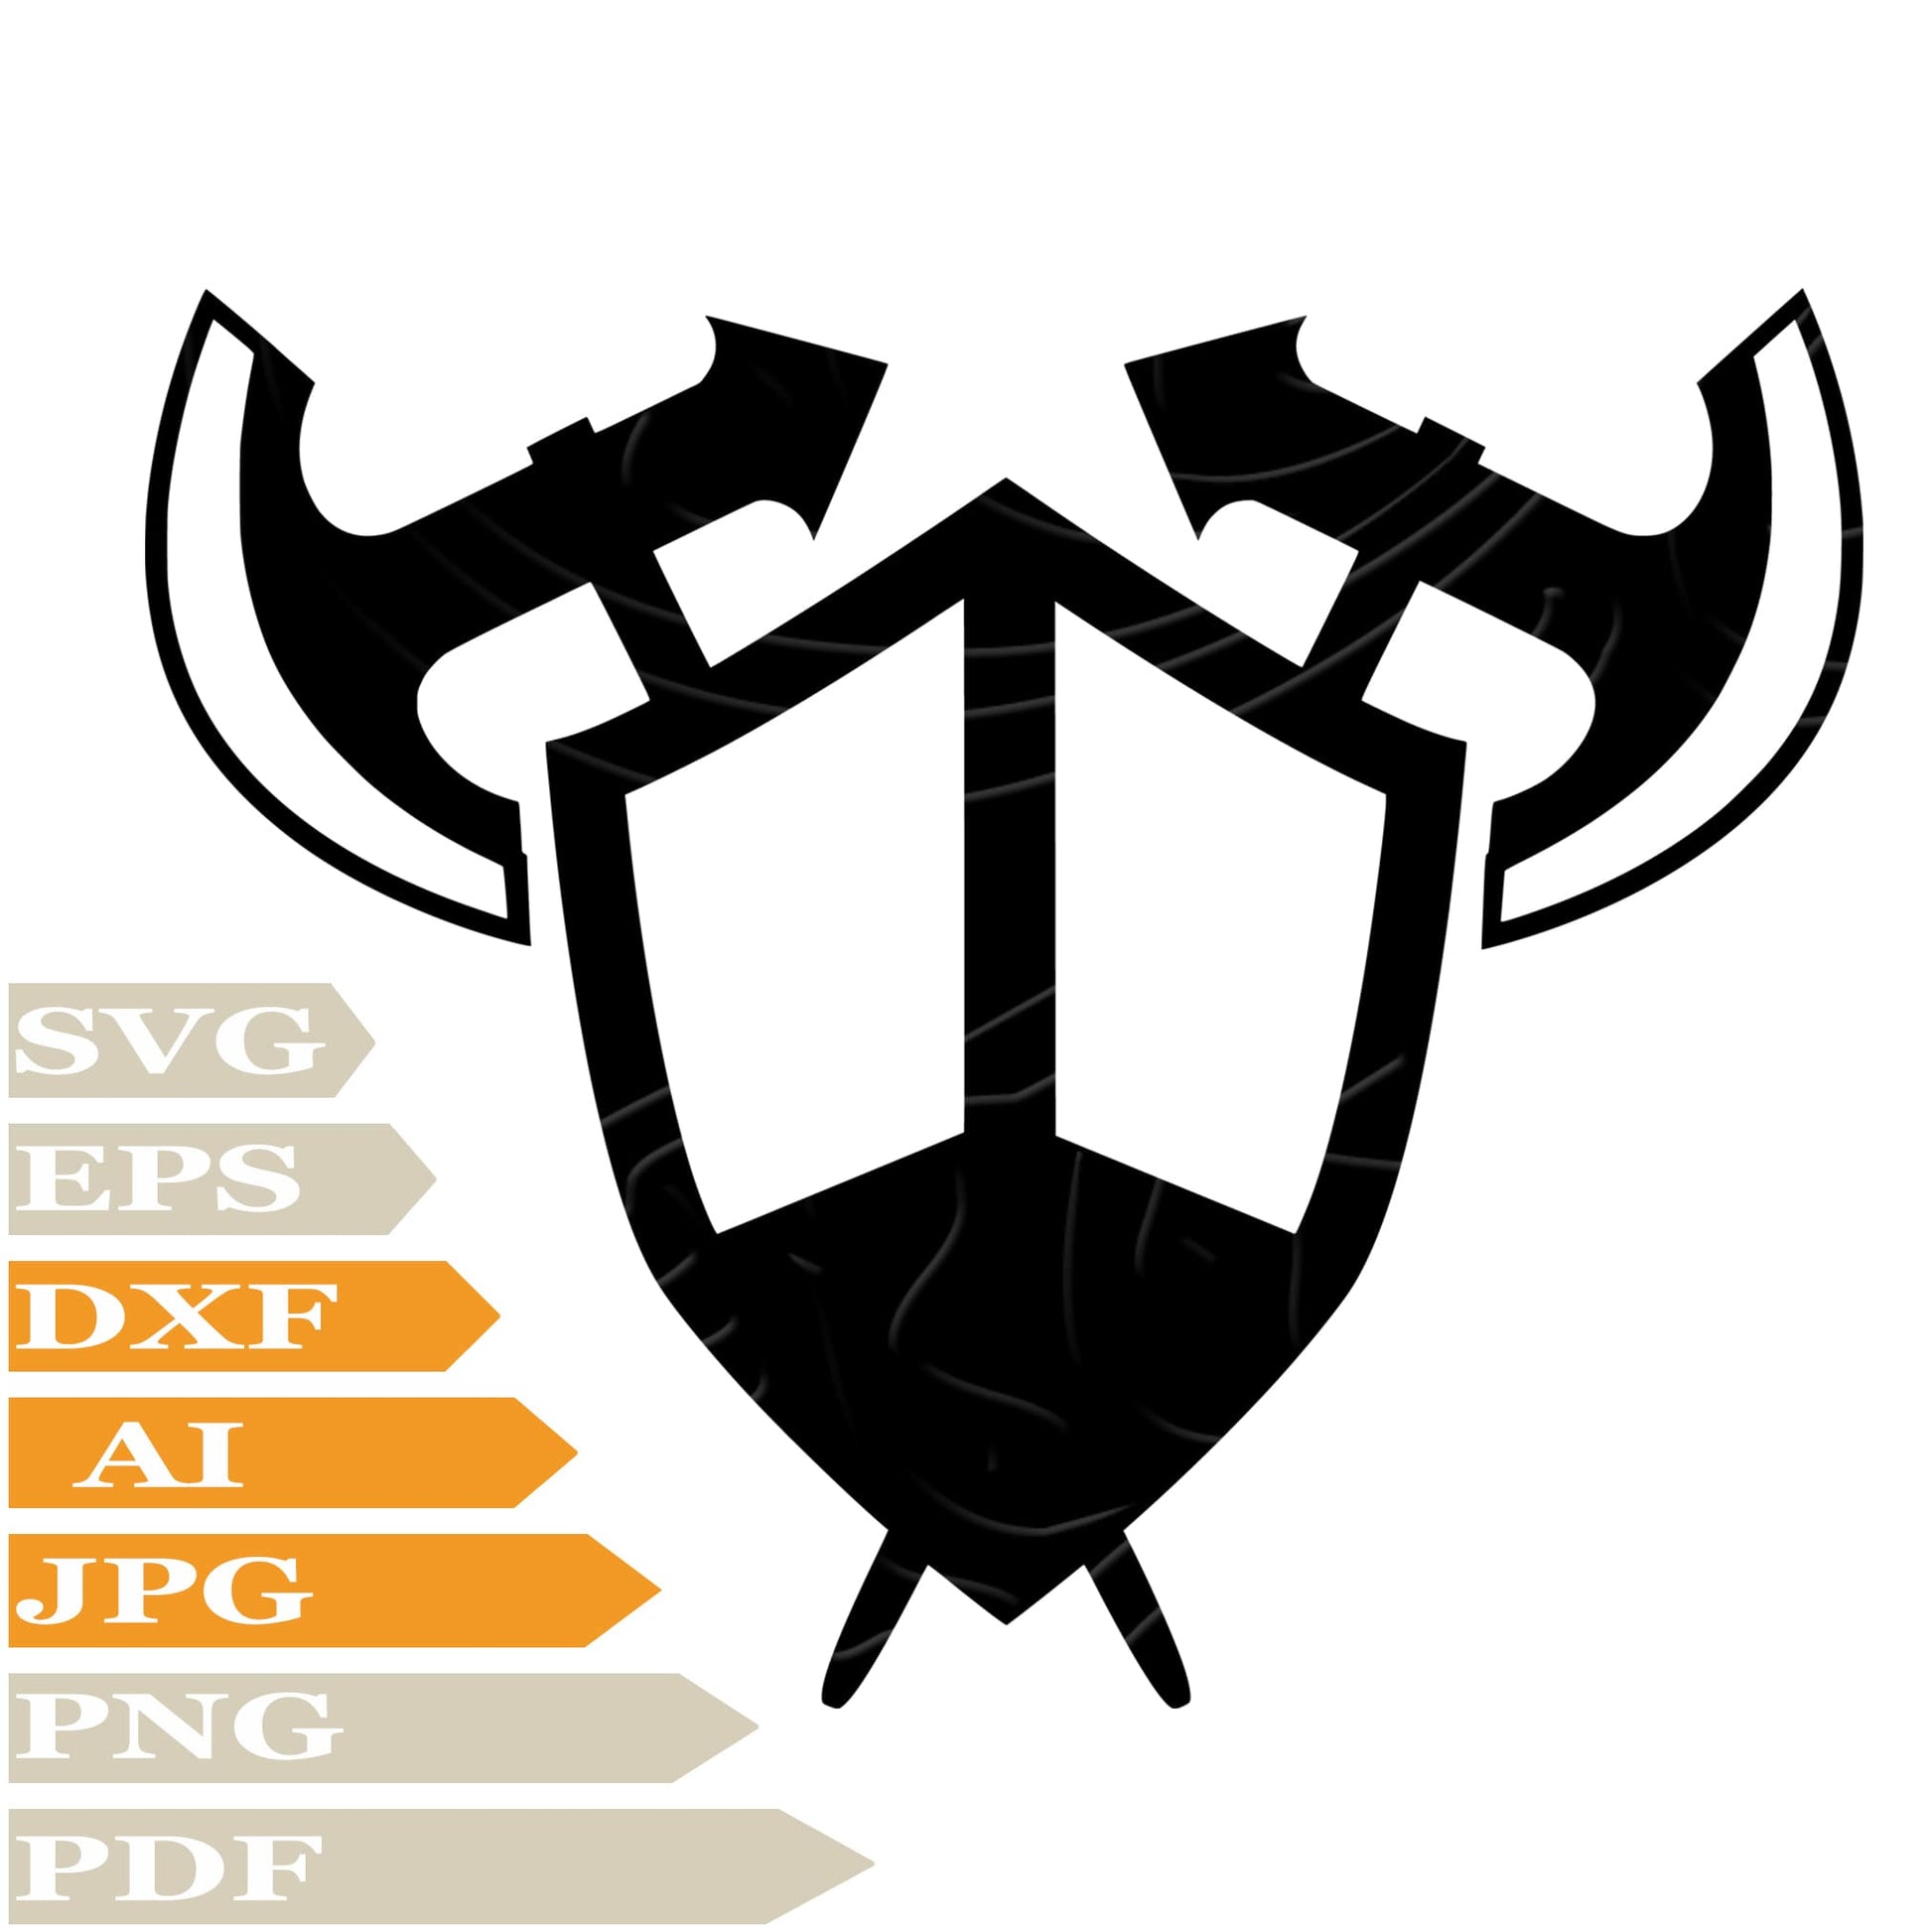 Axes SVG, Military Axes SVG Design, Armor PNG, Axe Vector Graphics, Military Axes Digital Instant Download, Armor For Cricut, Clip Art, Cut File, T-Shirts, Silhouette